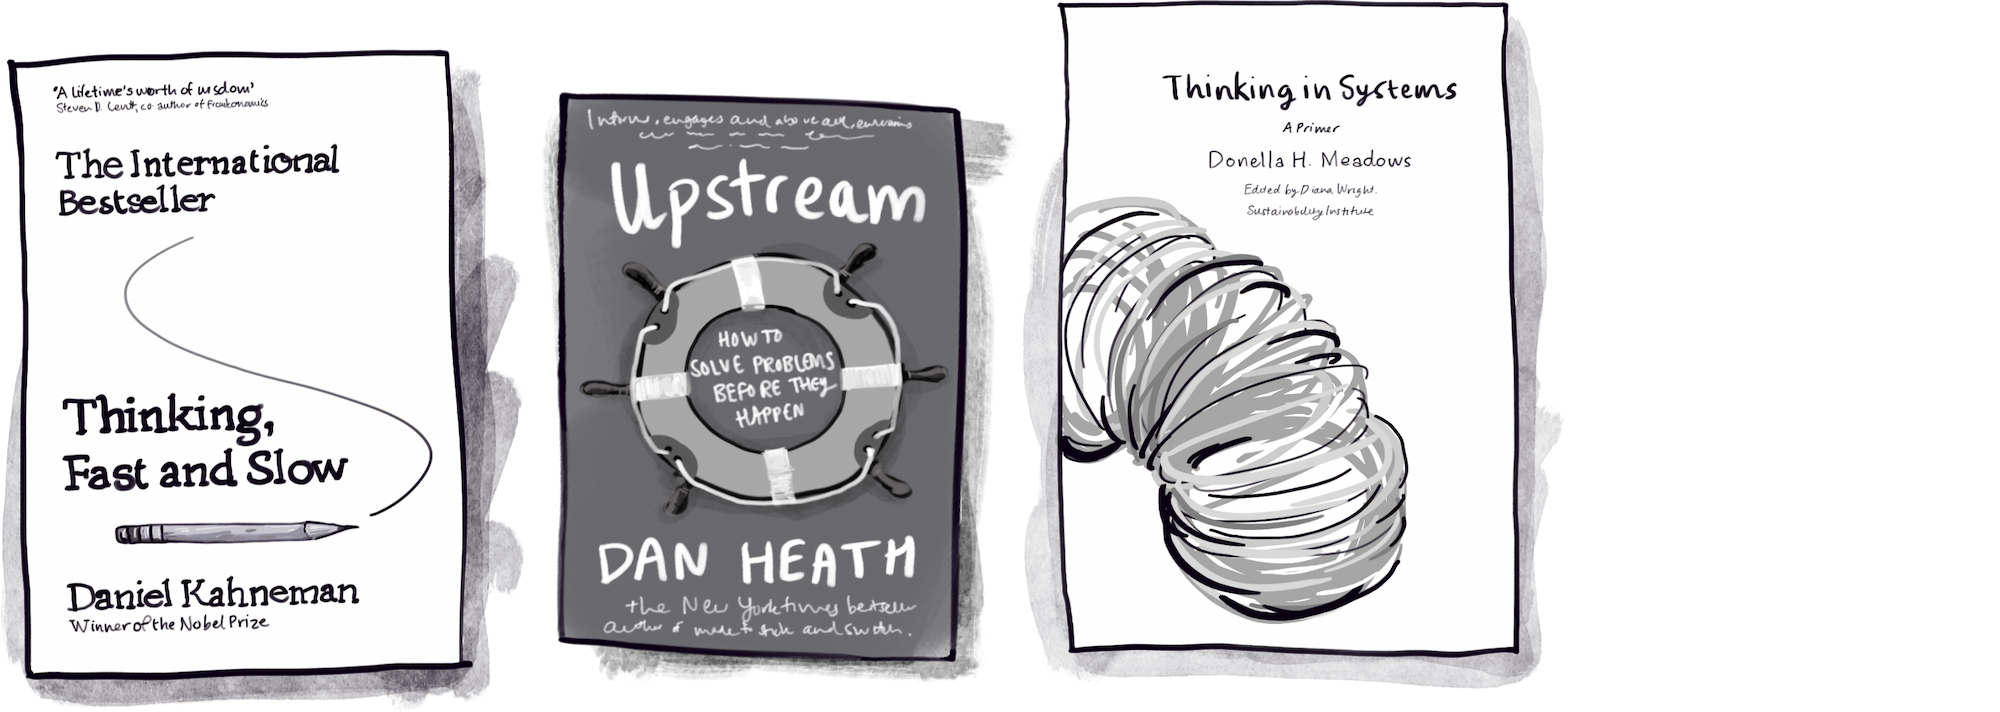 Thinking books for the Jimmy book list including Upstream by Dan Heath,
Thinking in systems: a primer by Donella Meadows, and Thinking fast and slow by Daniel Kahneman.